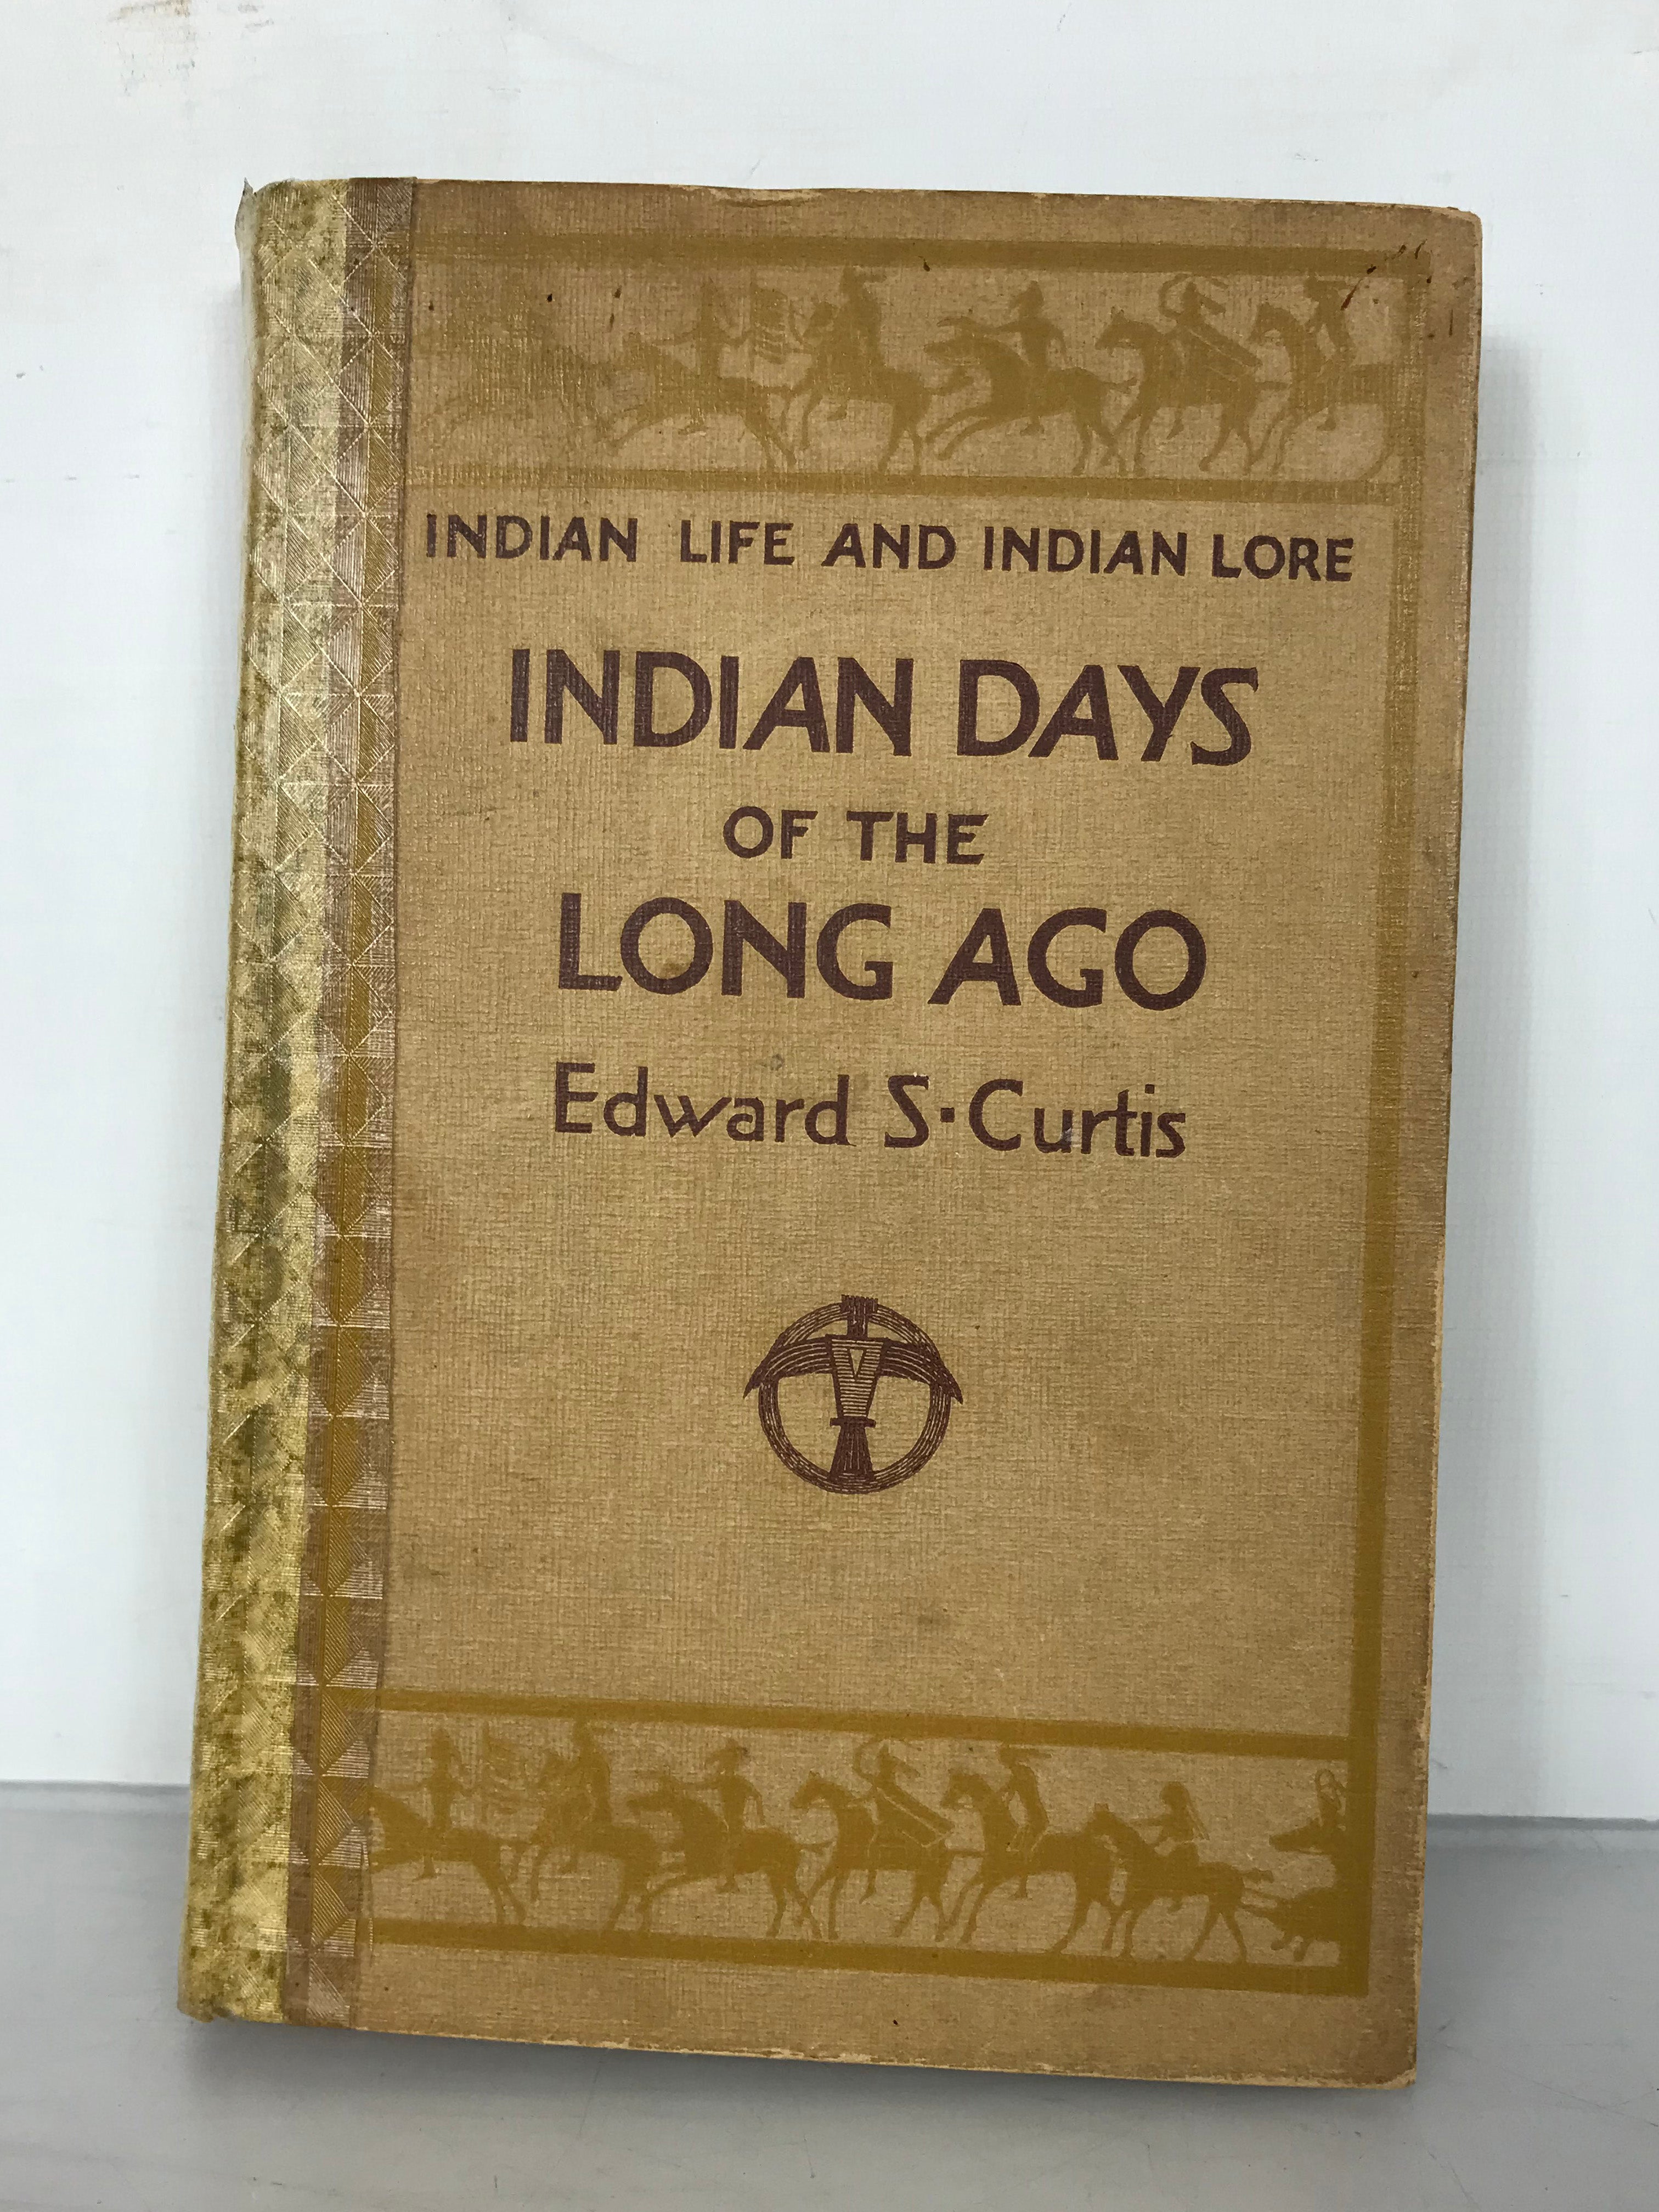 Indian Life and Indian Lore Indian Days of the Long Ago by Edward S. Curtis 1915